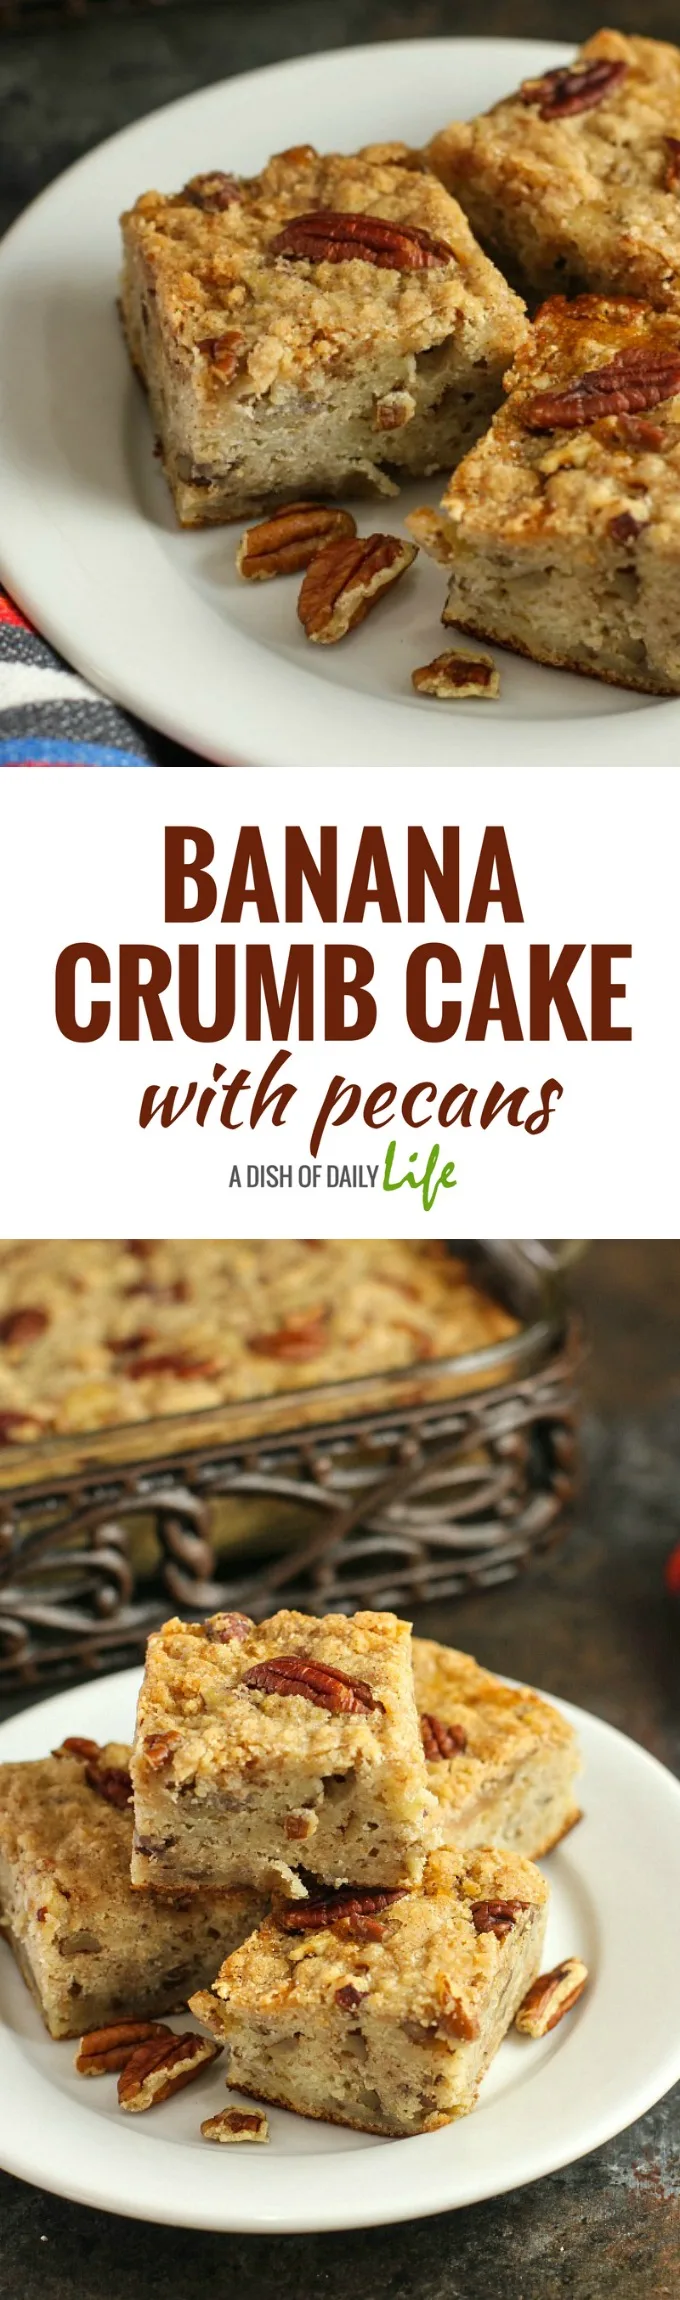 Banana Crumb Cake with Pecans...an absolutely delicious cross between banana bread and crumb cake! Dress it up with a scoop of ice cream or enjoy it as an anytime treat! Your family and friends will be asking you for the recipe!